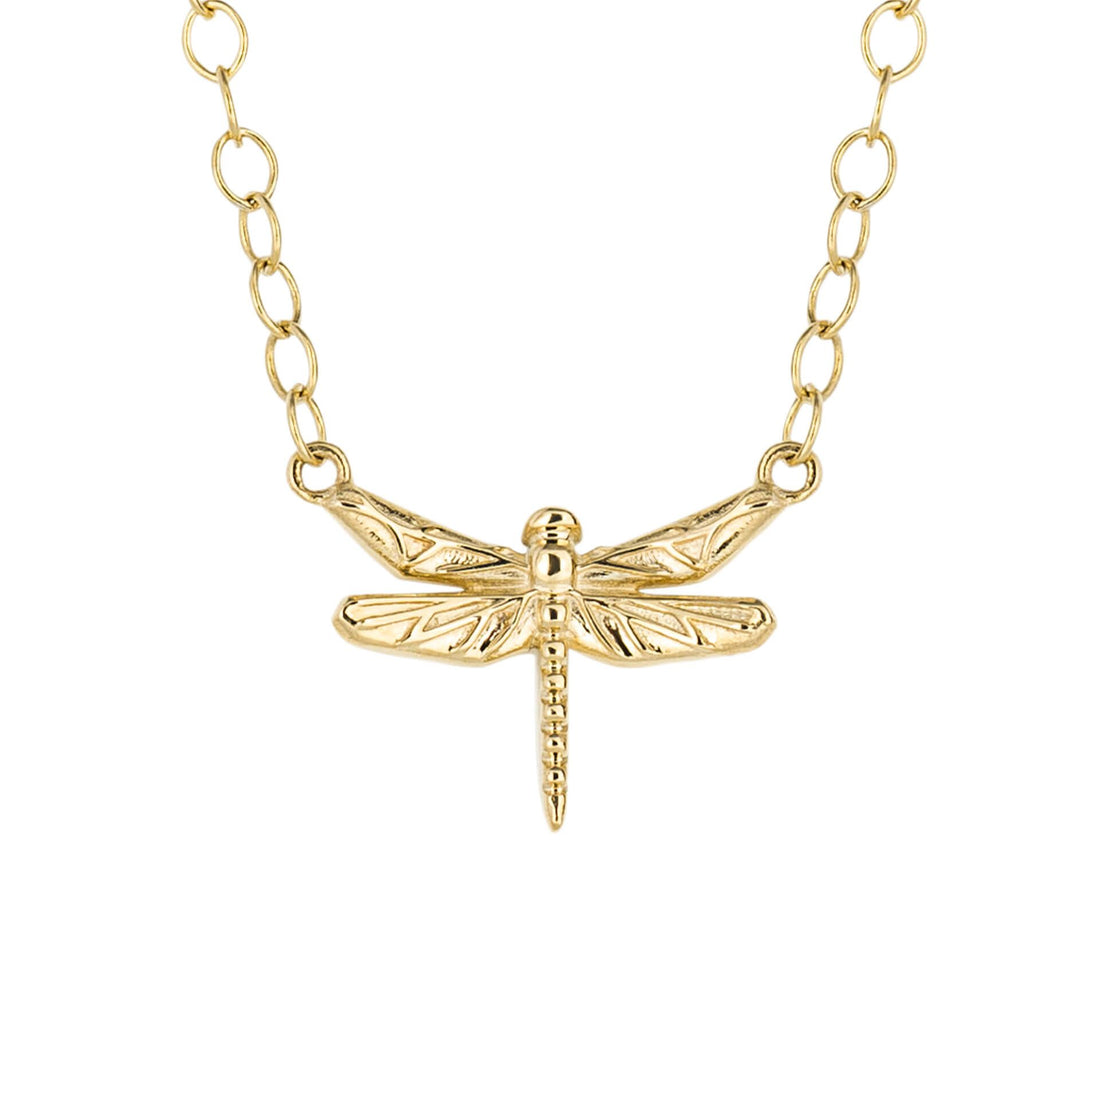 Dragonfly Motif Necklace in 9ct Yellow Gold